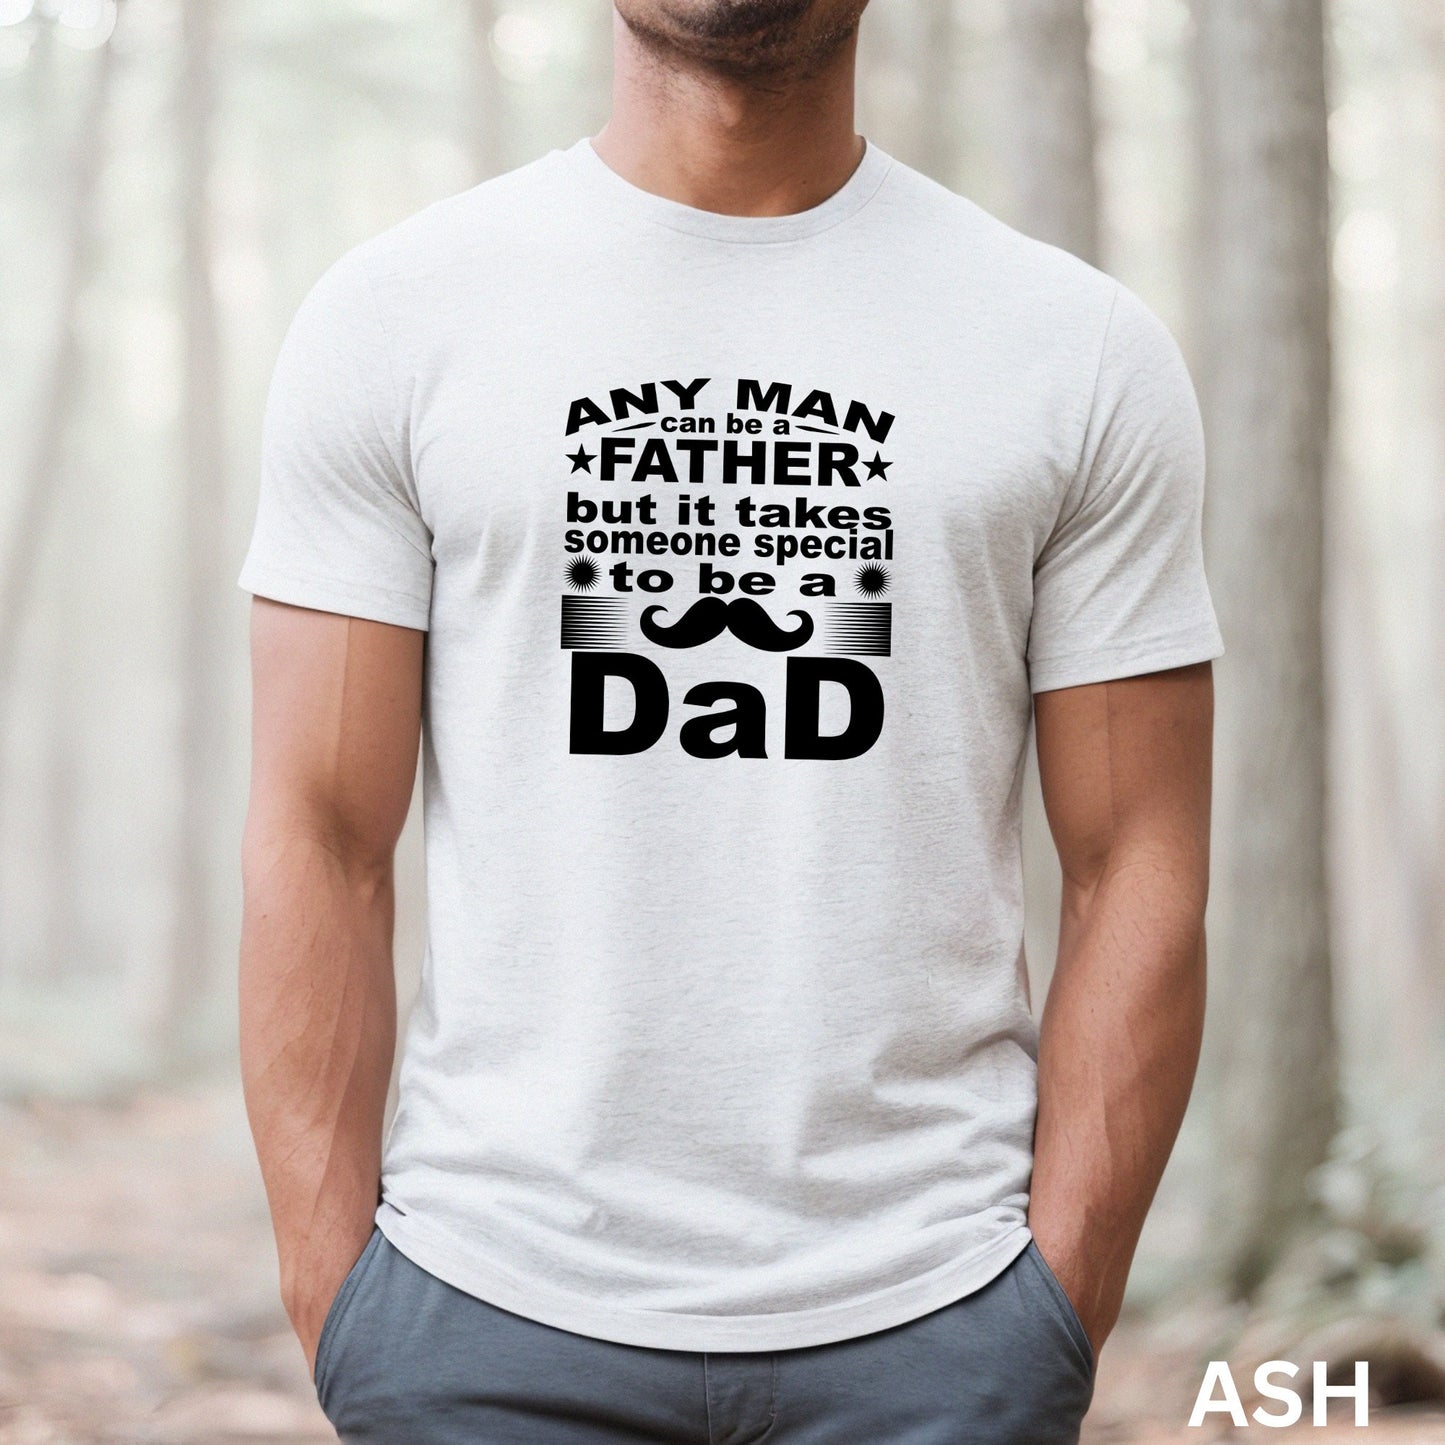 Any Man Can Be A Father Shirt - Special Dad Shirt - Father Appreciation Gift - Gift For Dad - Fathers Day Shirt - Dad Birthday Idea Gift